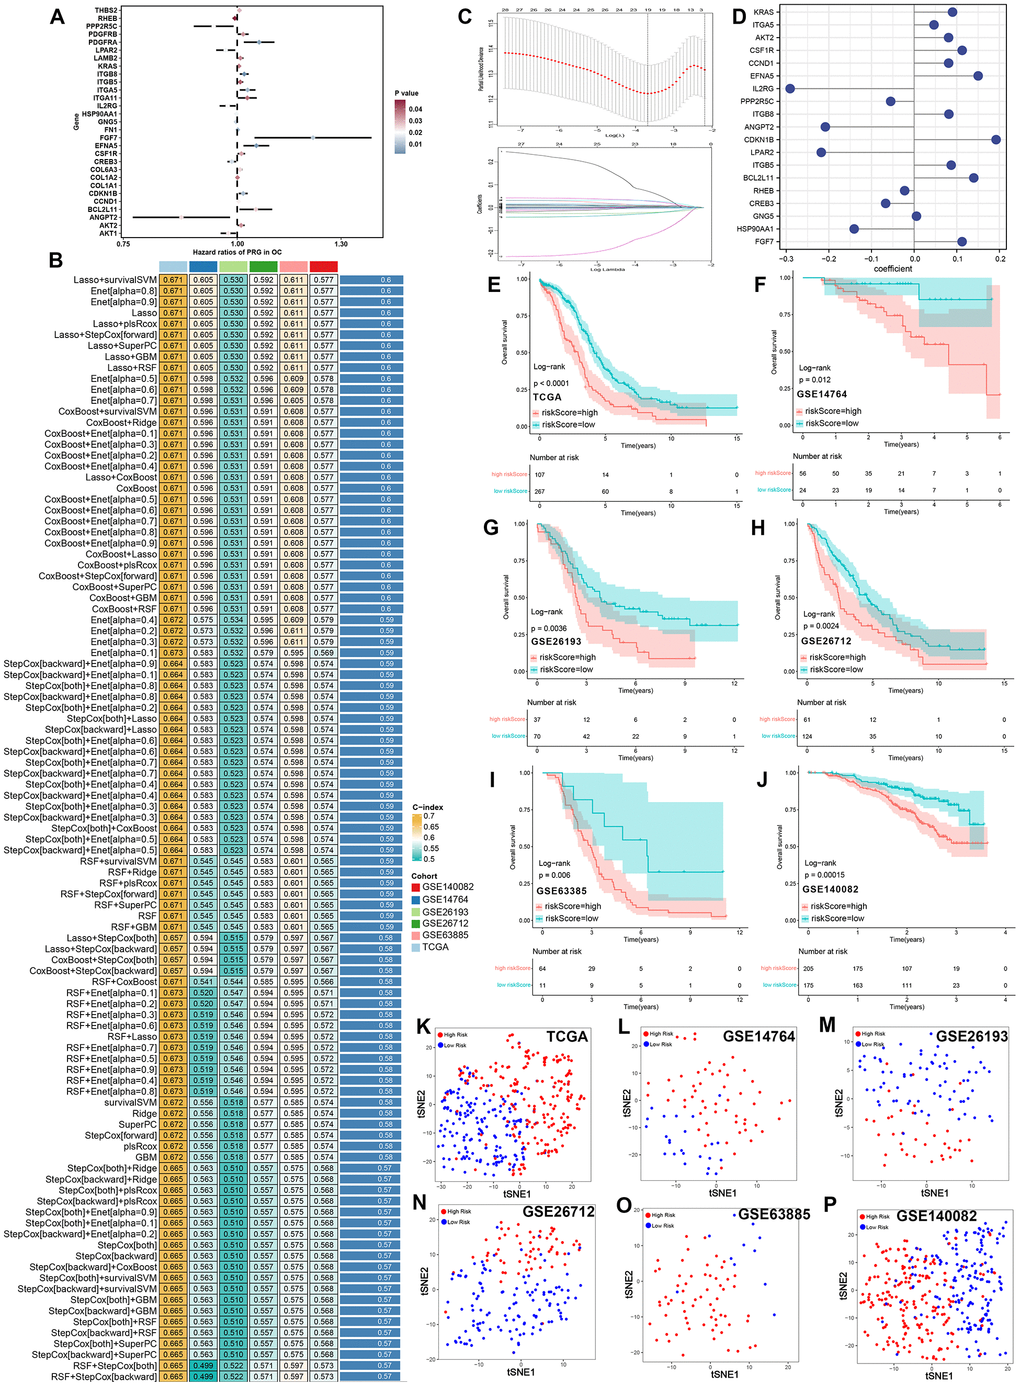 Integrative machine learning analysis constructed a prognostic PI3K/Akt pathway related signature. (A) Potential biomarker identified by univariate cox analysis. (B) The C-index of 101 kinds prognostic models constructed by 10 machine learning algorithms in training and testing cohort. (C) The determination of the optimal λ was obtained when the partial likelihood deviance reached the minimum value, and further generated Lasso coefficients of the most useful prognostic genes. (D) Coefficients of 19 genes finally obtained in survivalSVM regression. The survival curve of ovarian cancer with high and low risk score in TCGA (E), GSE14764 (F), GSE26193 (G), GSE26172 (H), GSE63885 (I) and GSE140082 (J) cohort. Cluster analysis of ovarian cancer cases with high and low risk score in TCGA (K), GSE14764 (L) GSE26193 (M), GSE26172 (N), GSE63885(O) and GSE140082 (P) cohort by using tSNE method.